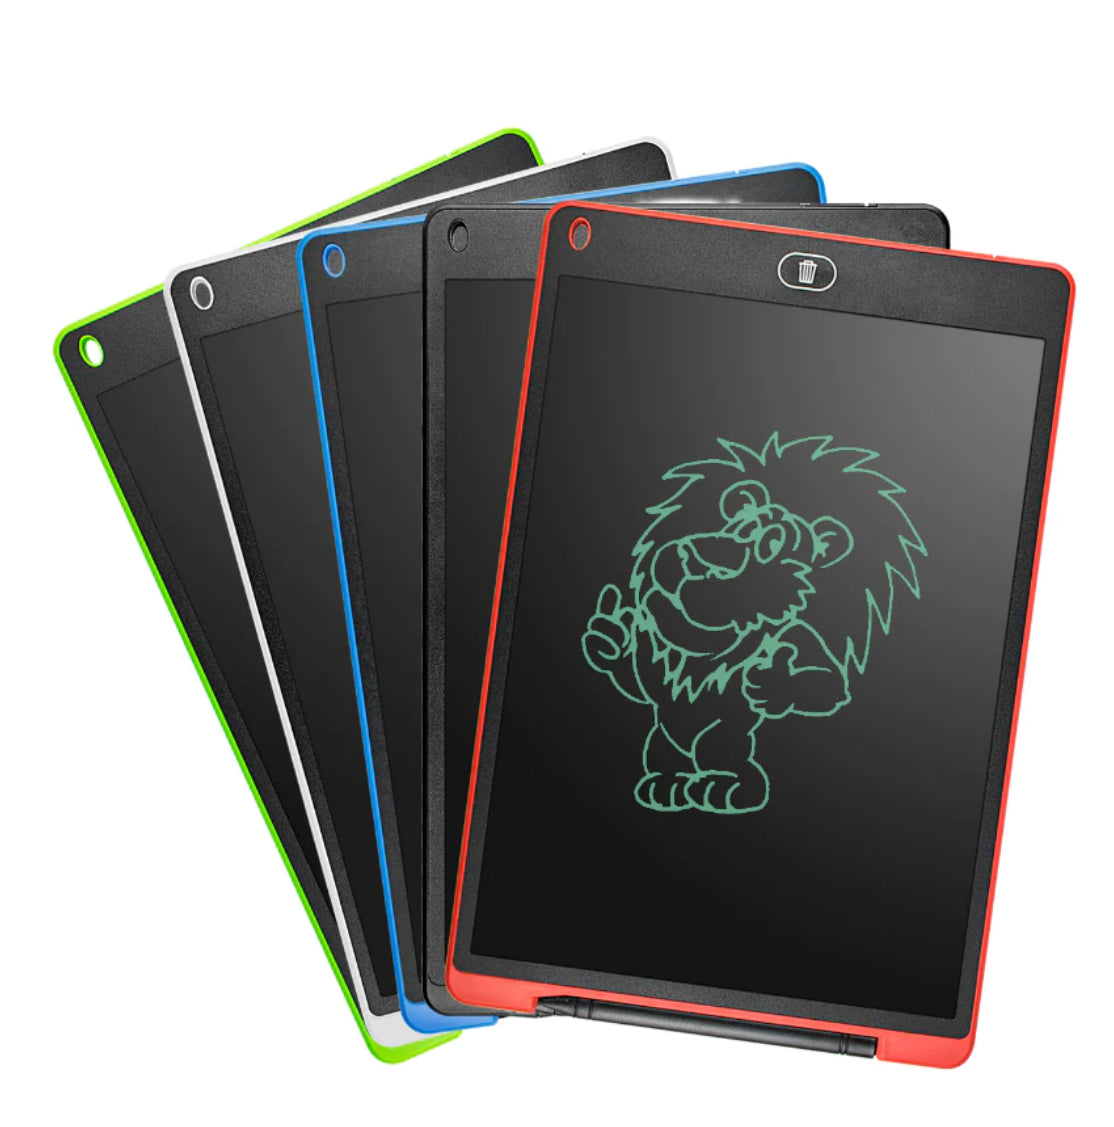 Advanced LCD Writing Tablet for Digital Note-Taking and Sketching